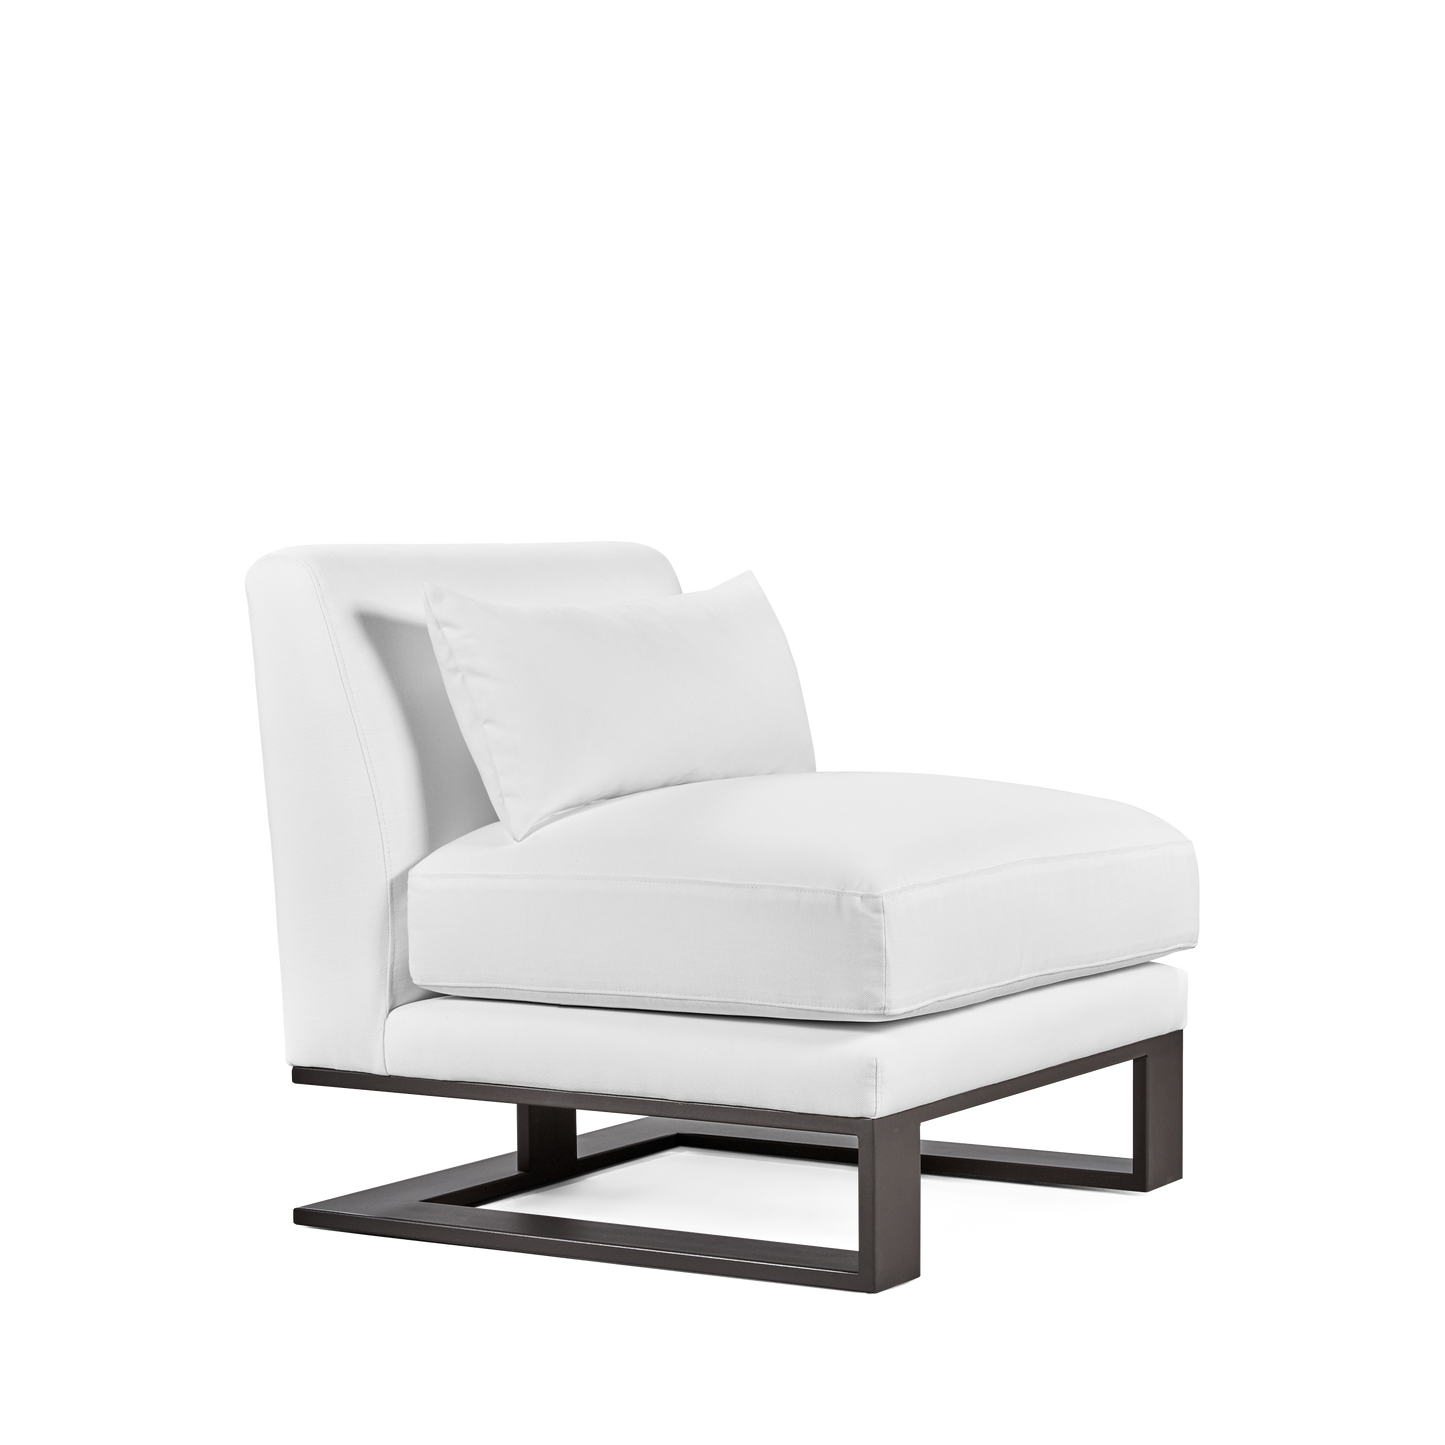 Side view of metal framed Alpes armchair with white textile